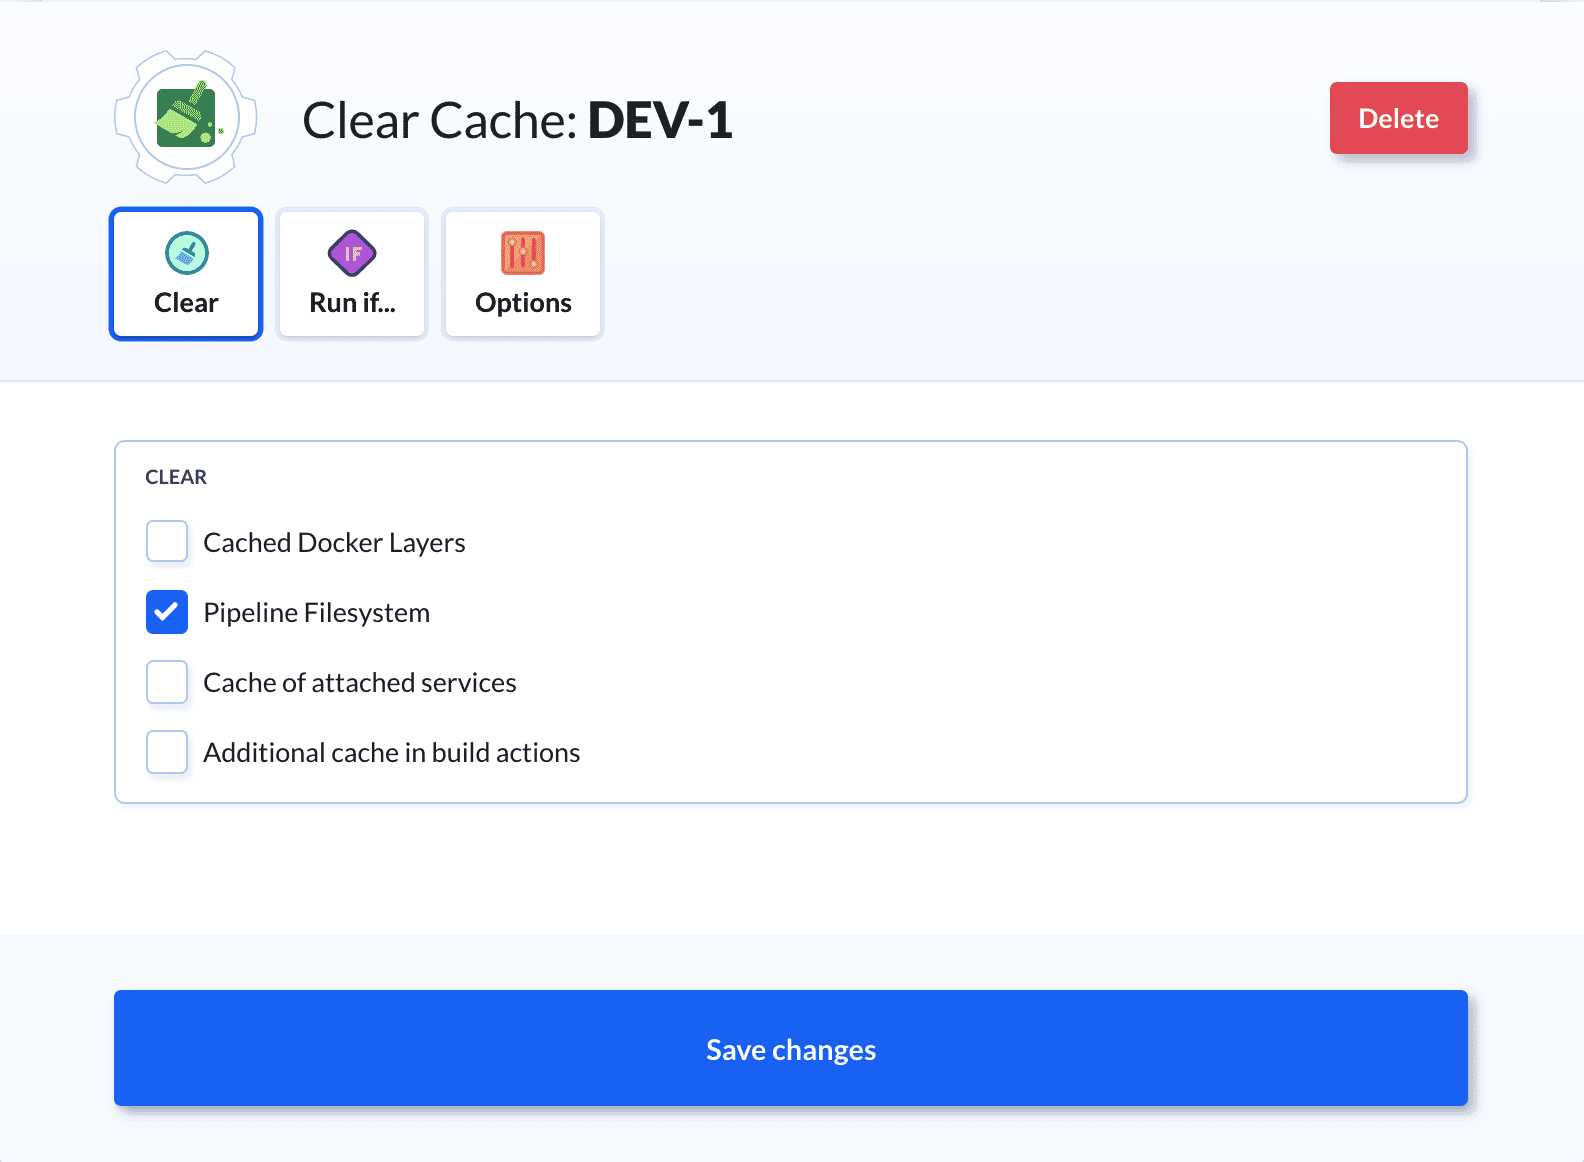 Clear cache action overview